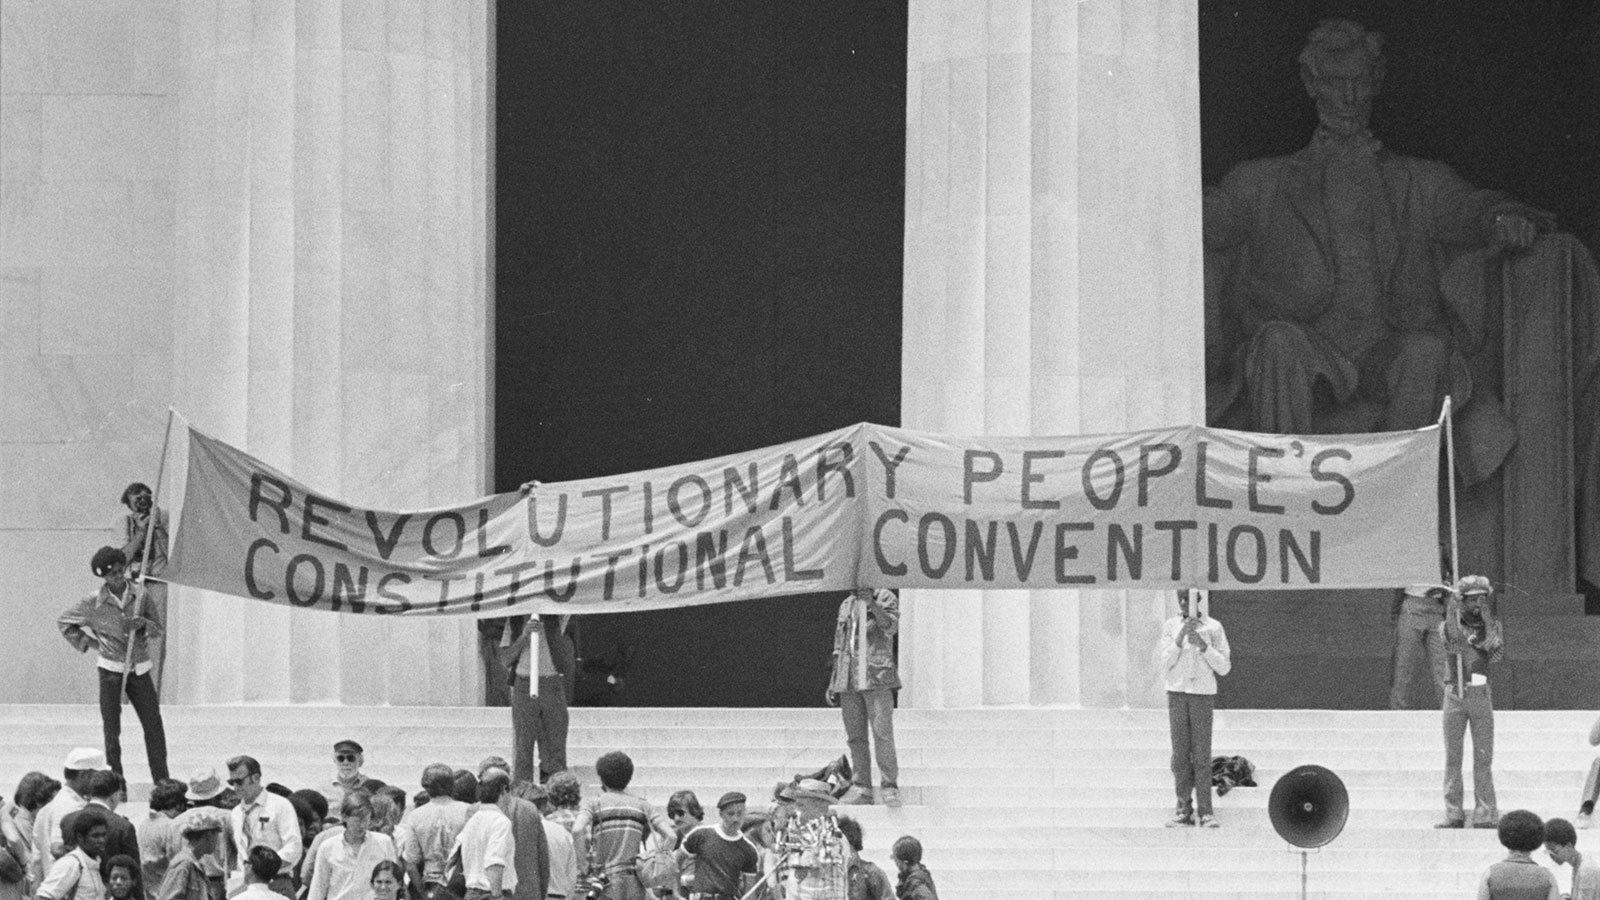 evolutionary People's Constitutional Convention at the Lincoln Memorial on June 19, 1970